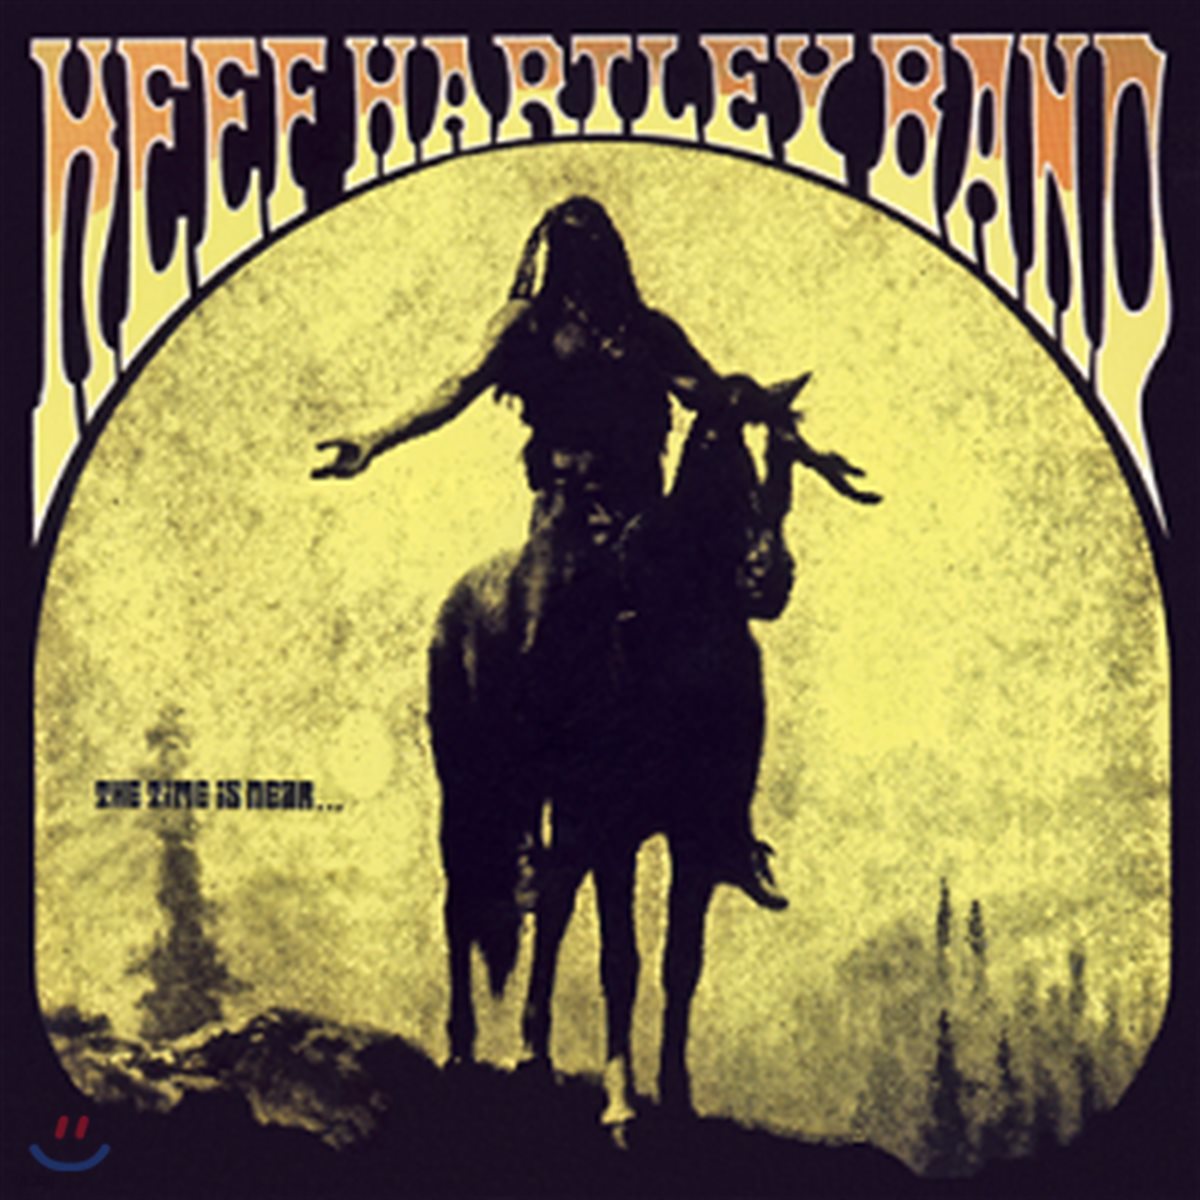 The Keef Hartley Band (키프 하틀리 밴드) - The Time Is Near [LP]